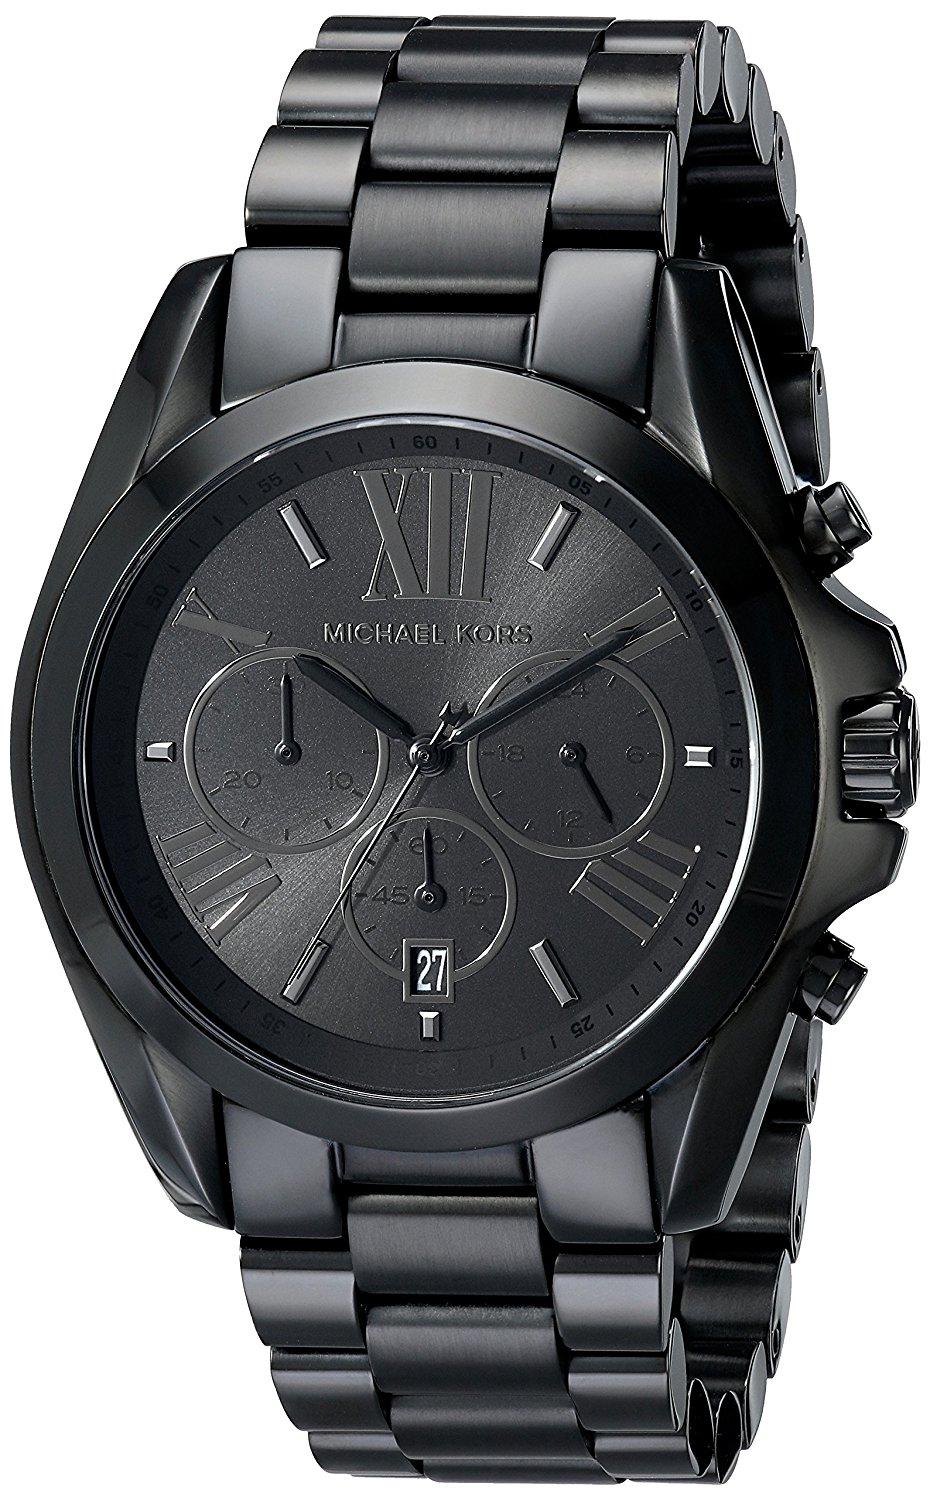 Michael Kors Watches Price UP TO 59% OFF | institutoeticaclinica.org